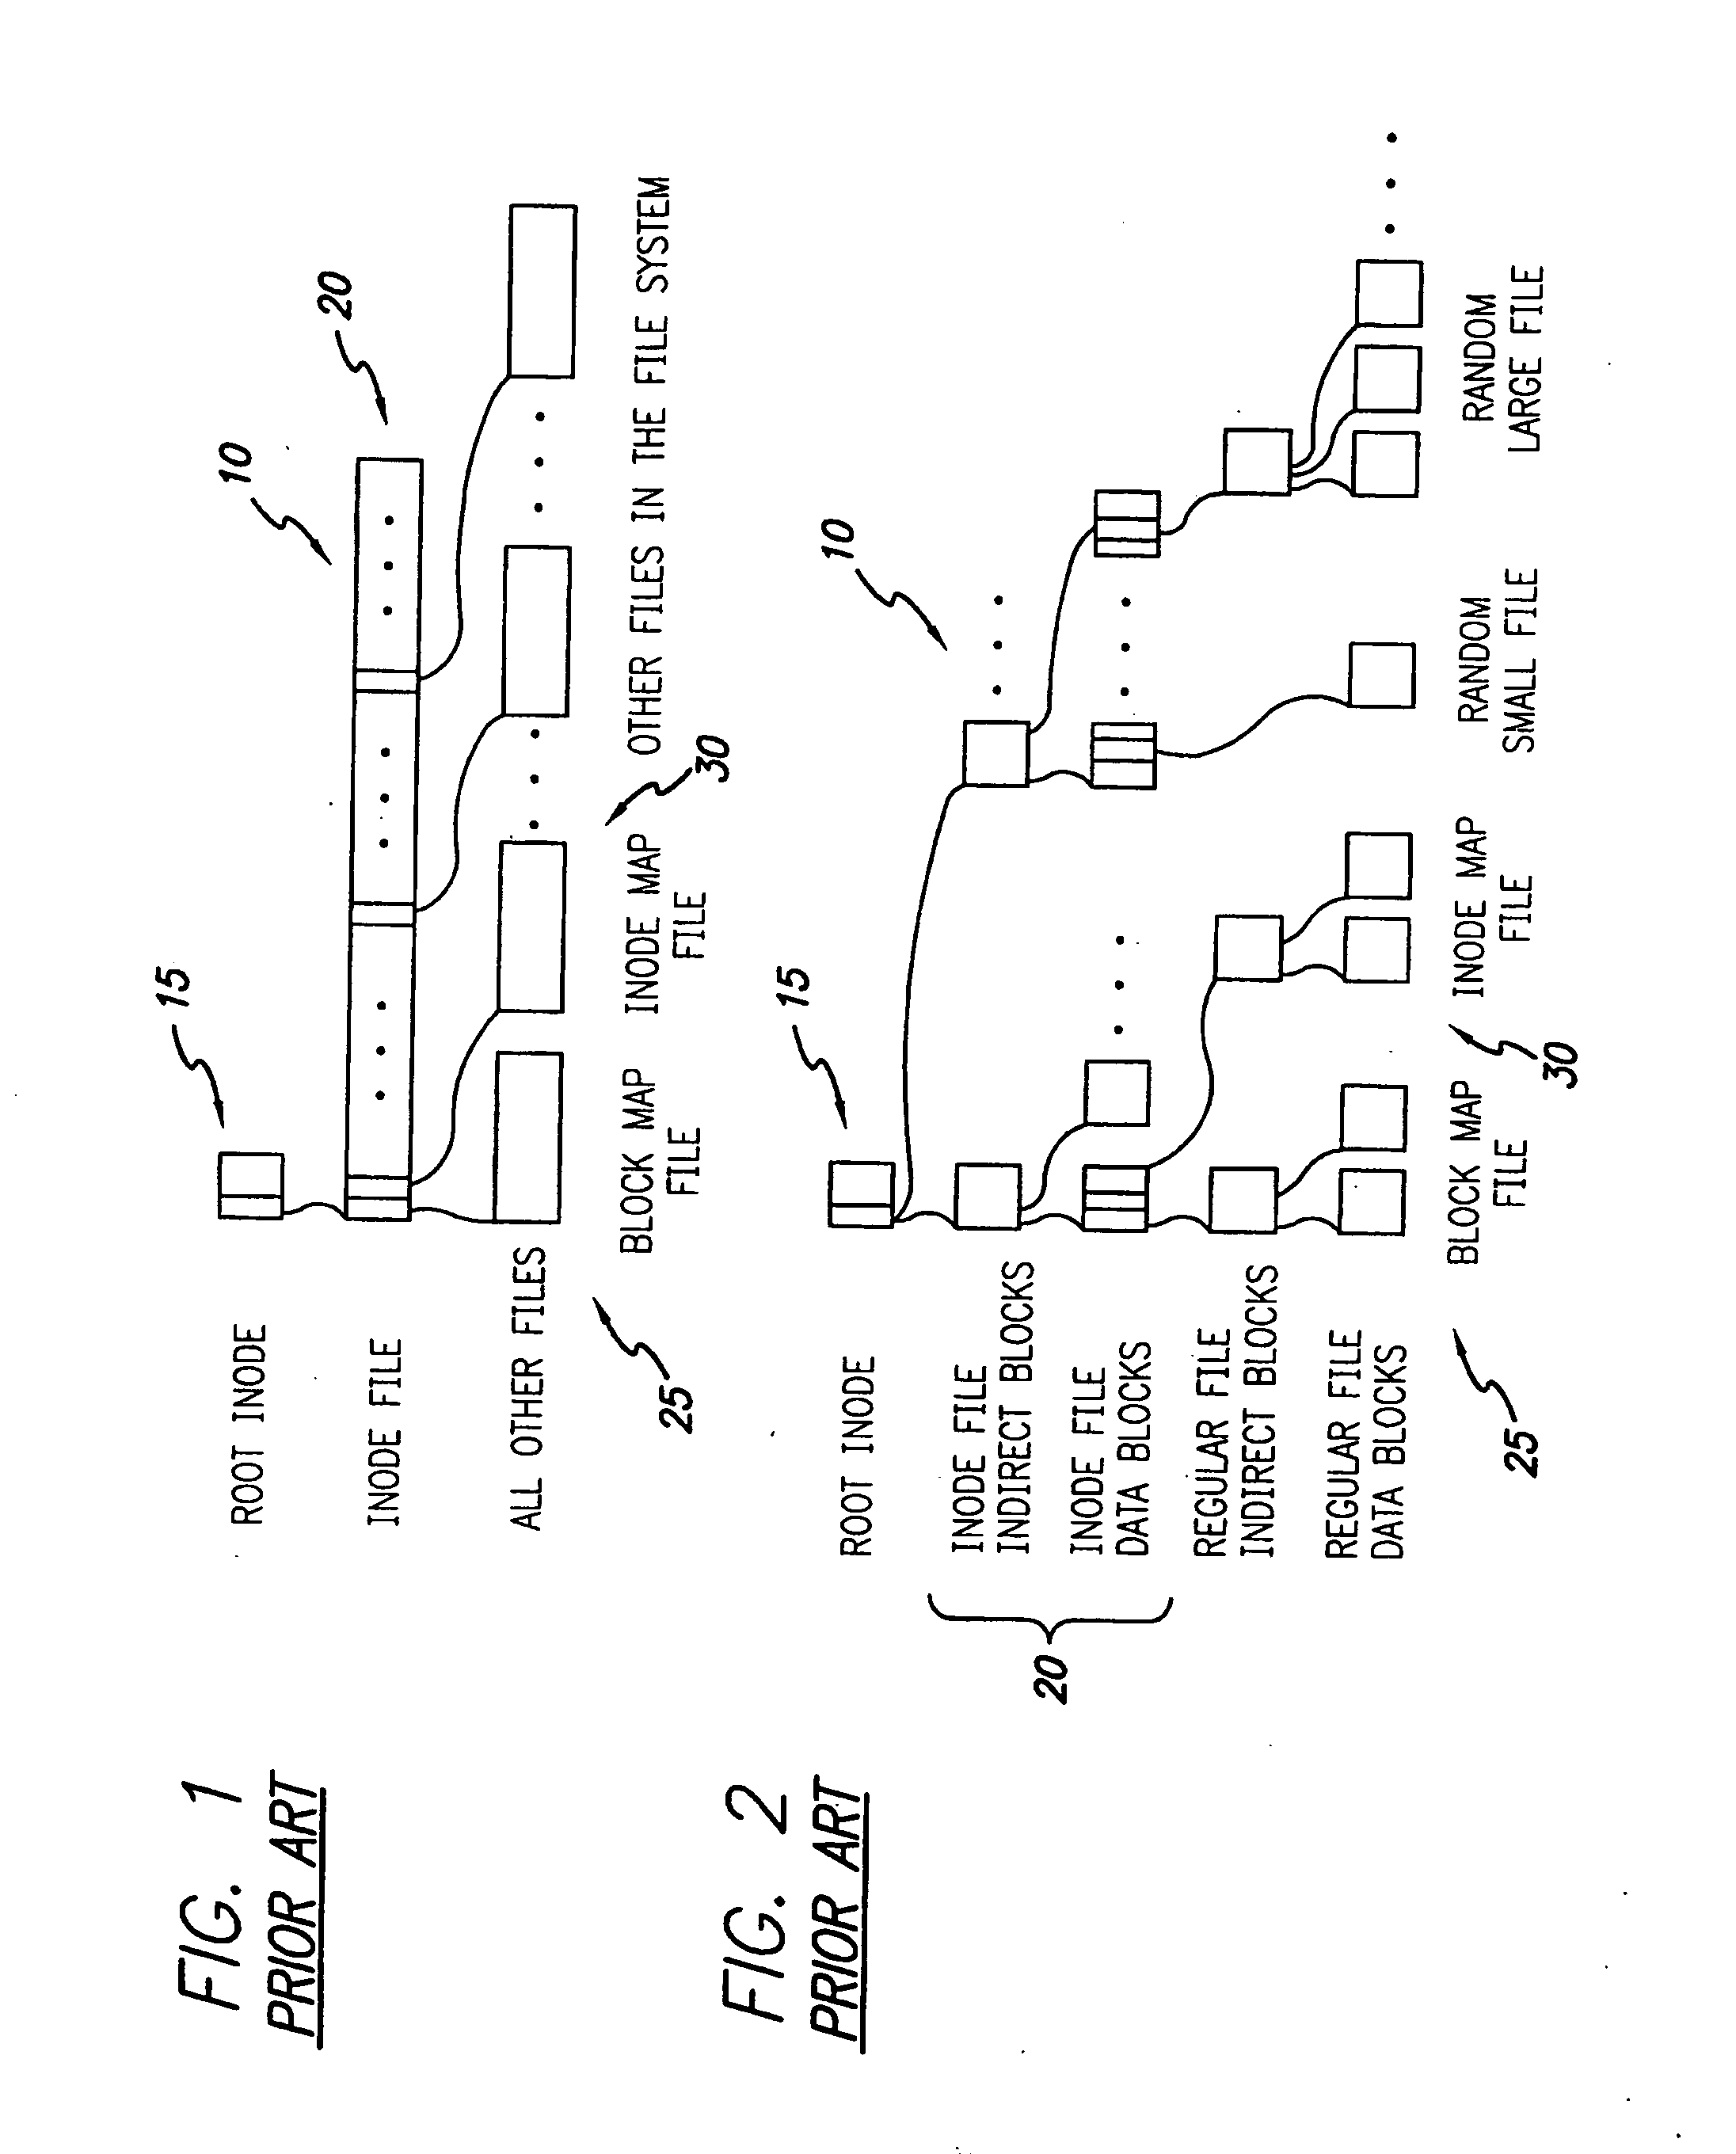 System and method for using file system snapshots for online data backup